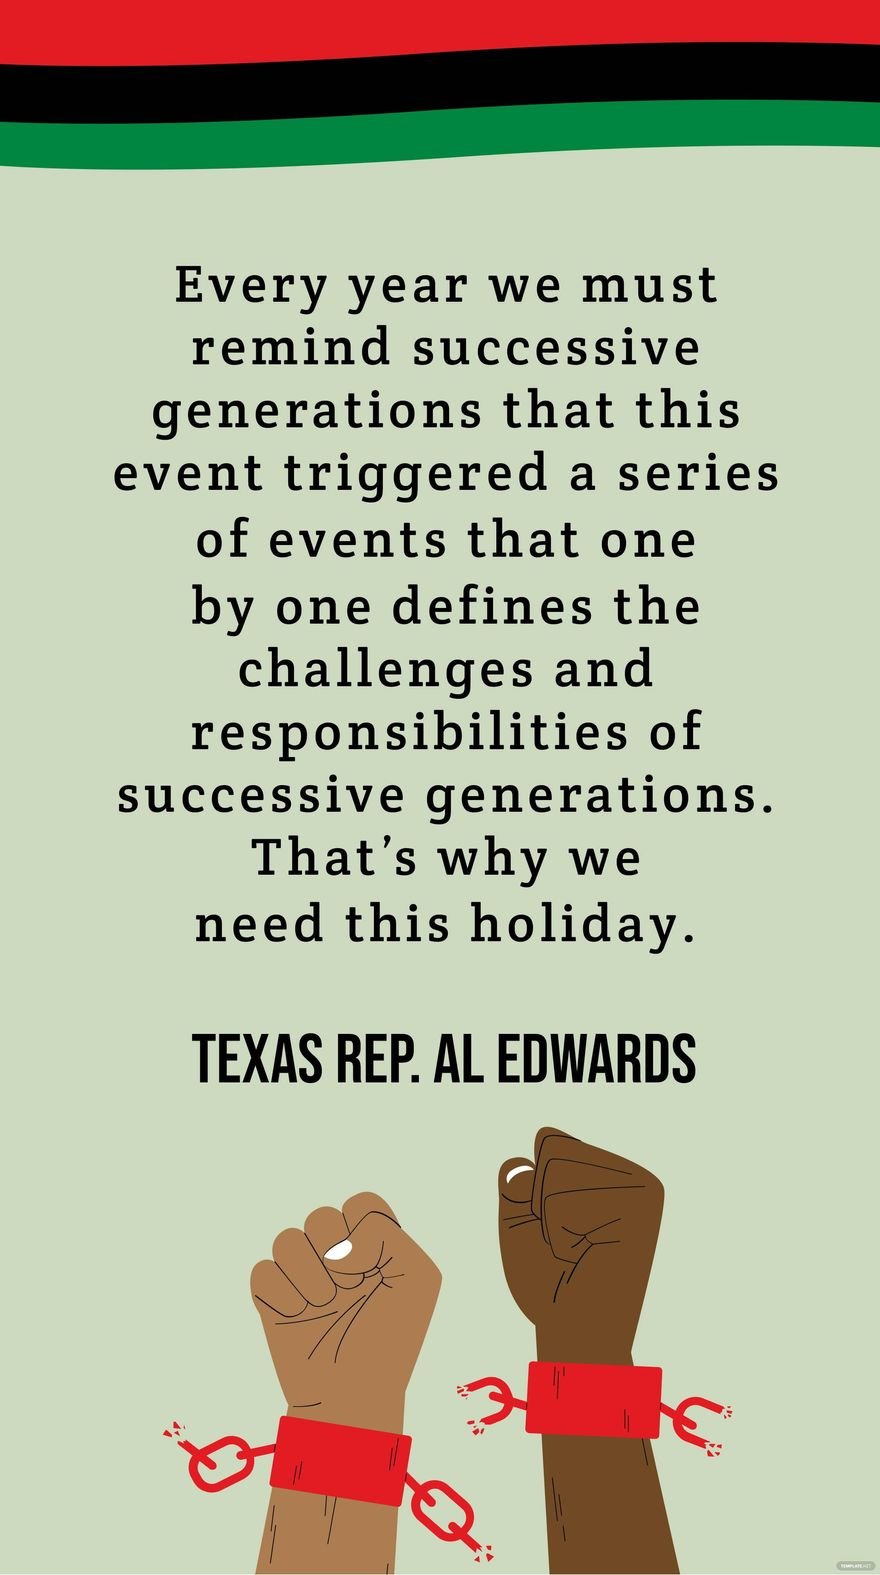 Texas Rep.AL Edwards - Every year we must remind successive generations that this event triggered a series of events that one by one defines the challenges and responsibilities of successive generatio